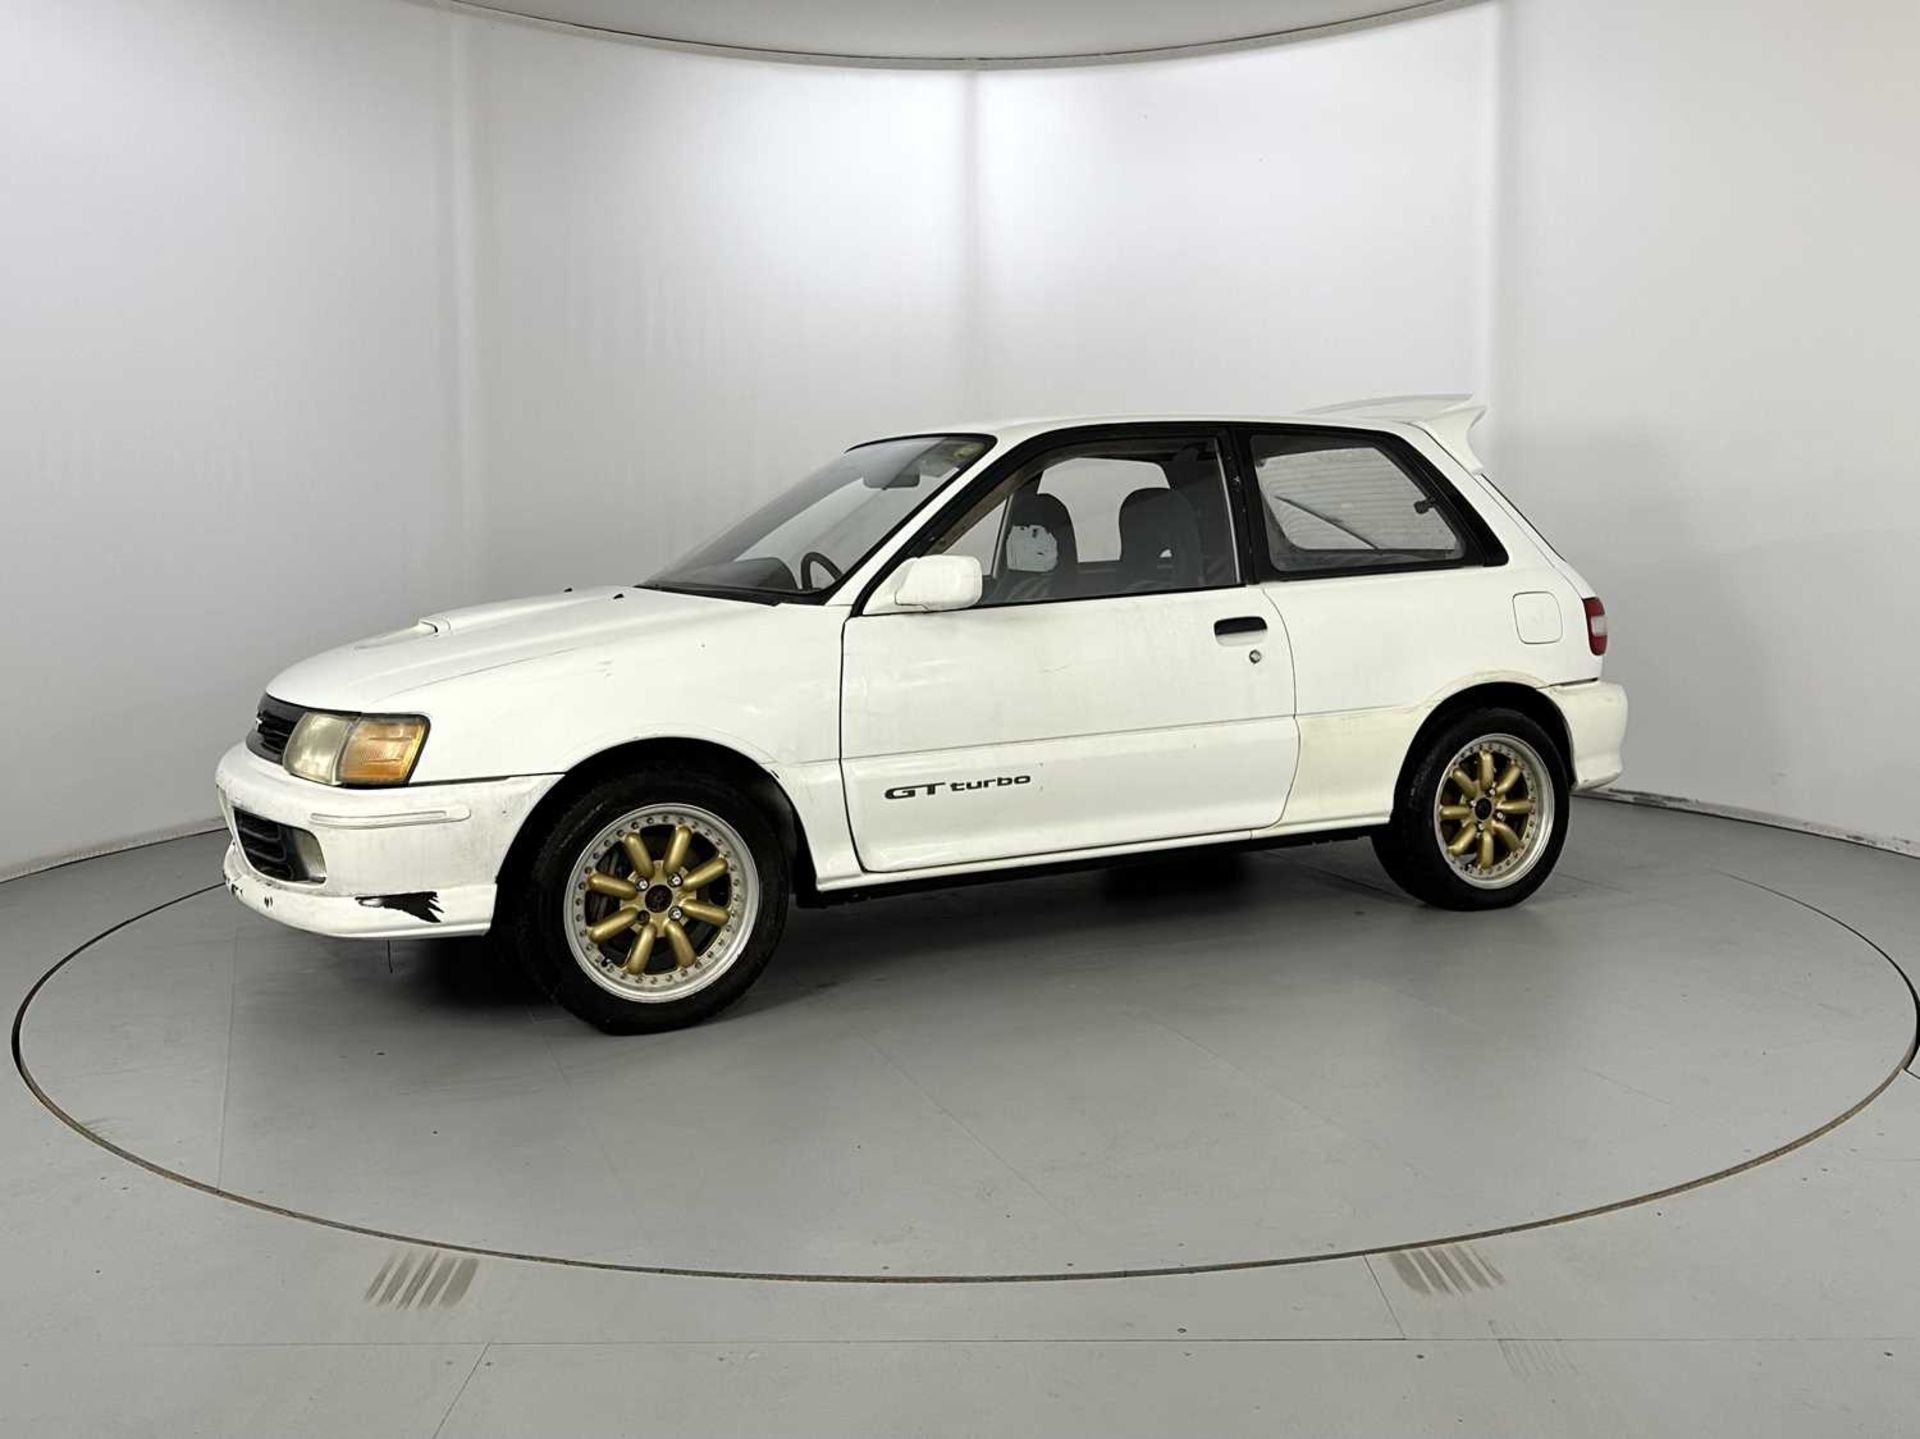 1990 Toyota Starlet GT Turbo - Image 4 of 29